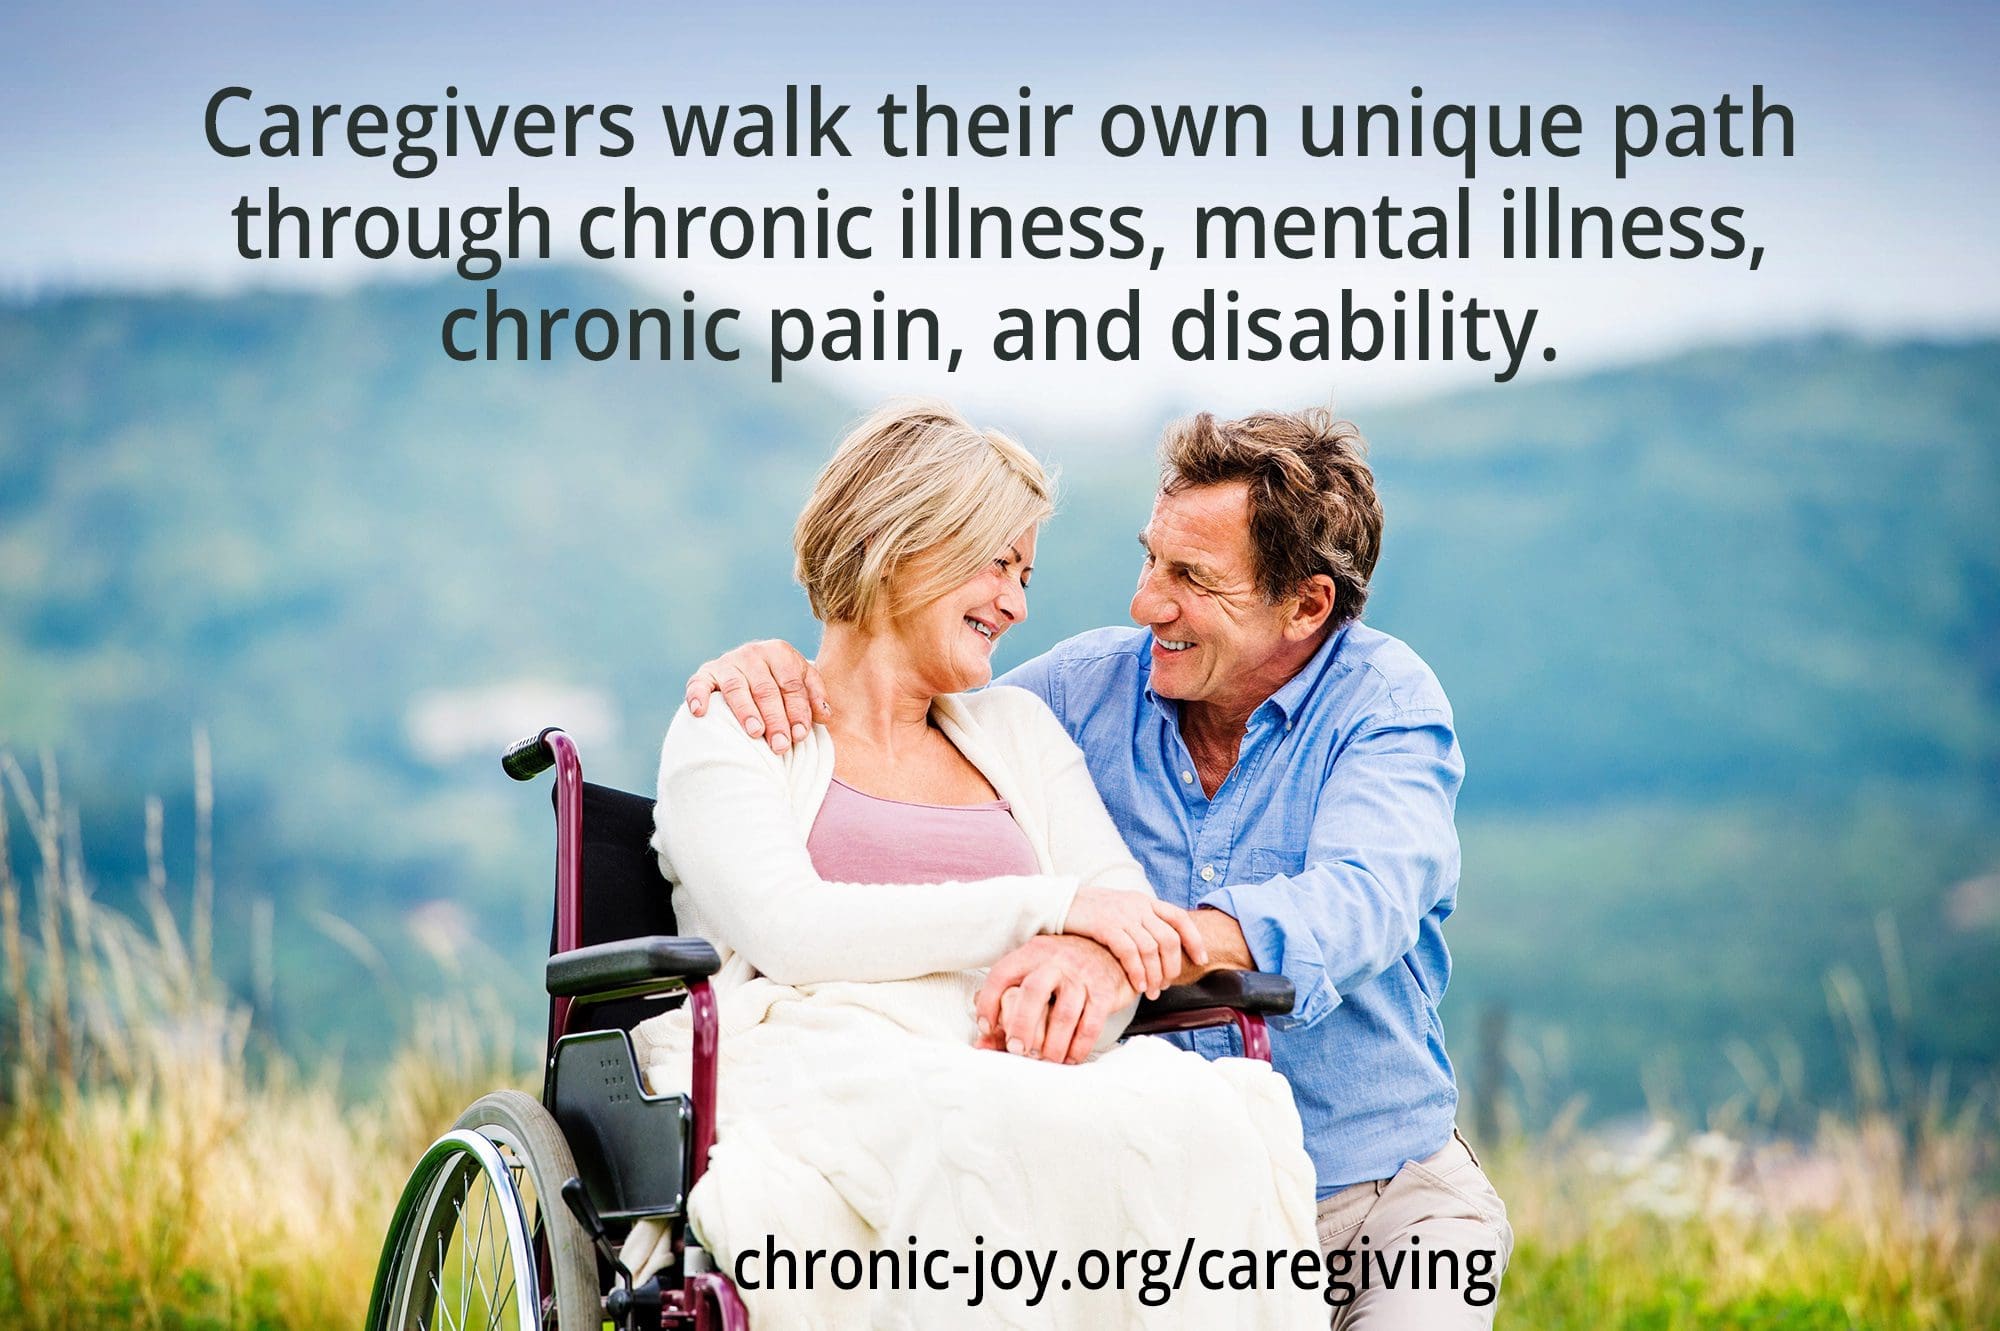 Can You Play With Me Today? Understanding Caregiver Chronic Pain